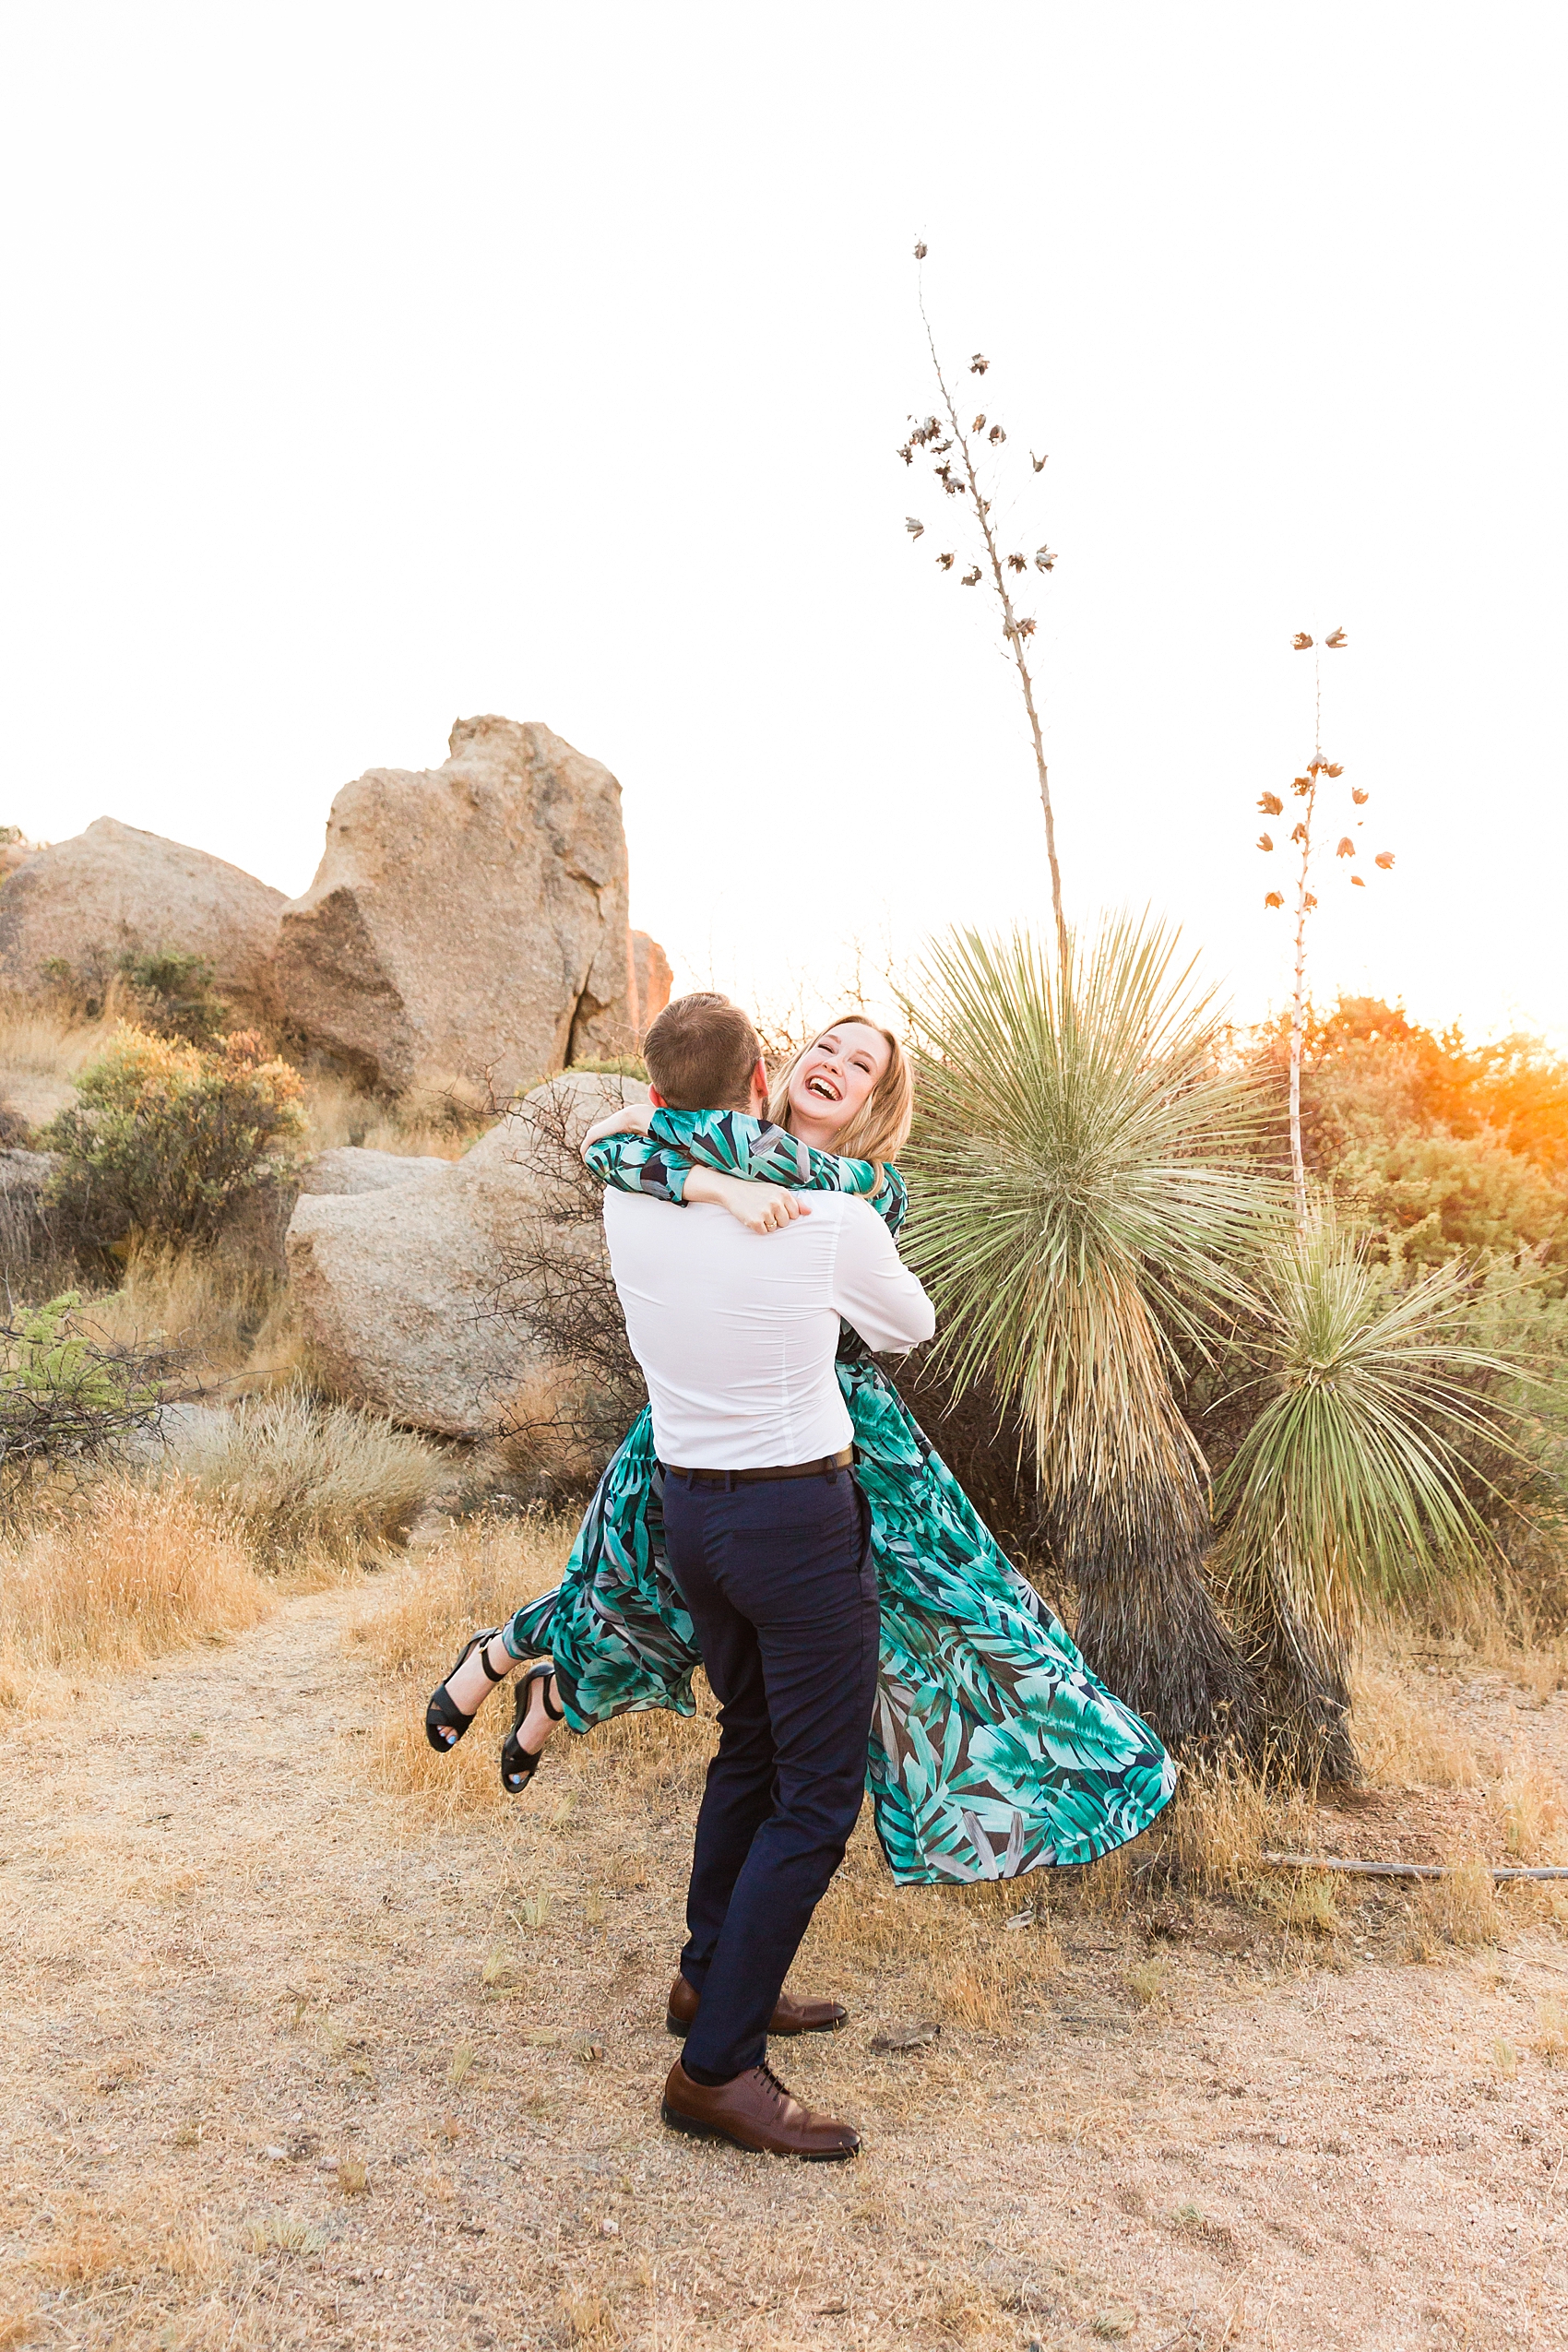 Leah Hope Photography | Scottsdale Phoenix Arizona | Desert Landscape Cactus Scenery Boulders | Couple Photos | In Love | Romantic Couple Pictures | Engagement Photos | Engaged | Proposal | Proposing Pictures | How He Asked | What to Wear | How to Pose | Couple Poses Posing | Portrait Photographer | Engagement Photography | Surprise Proposal